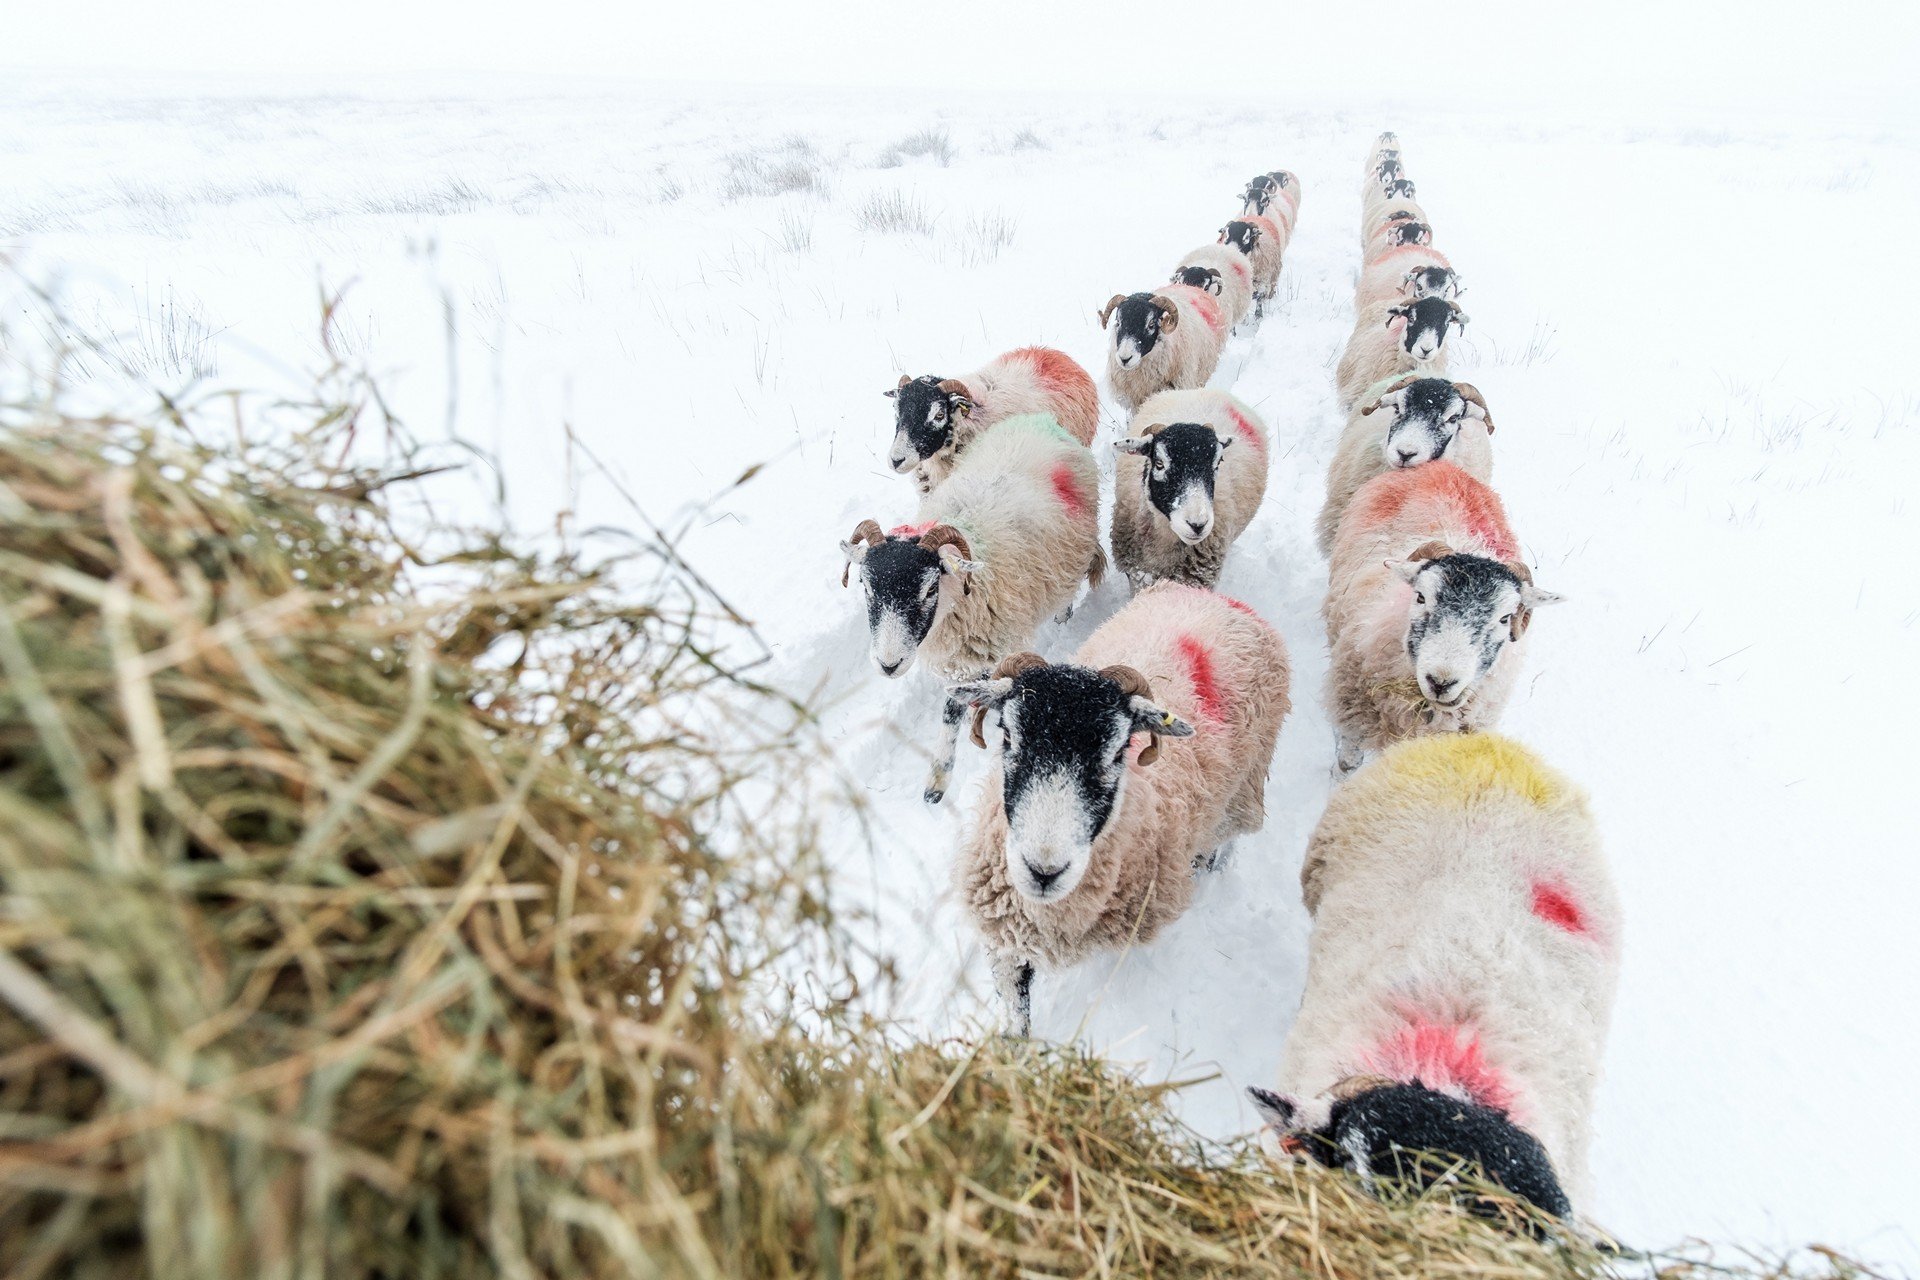 Guy Carpenter Documents the Beautiful Life of Sheep With No Photoshop